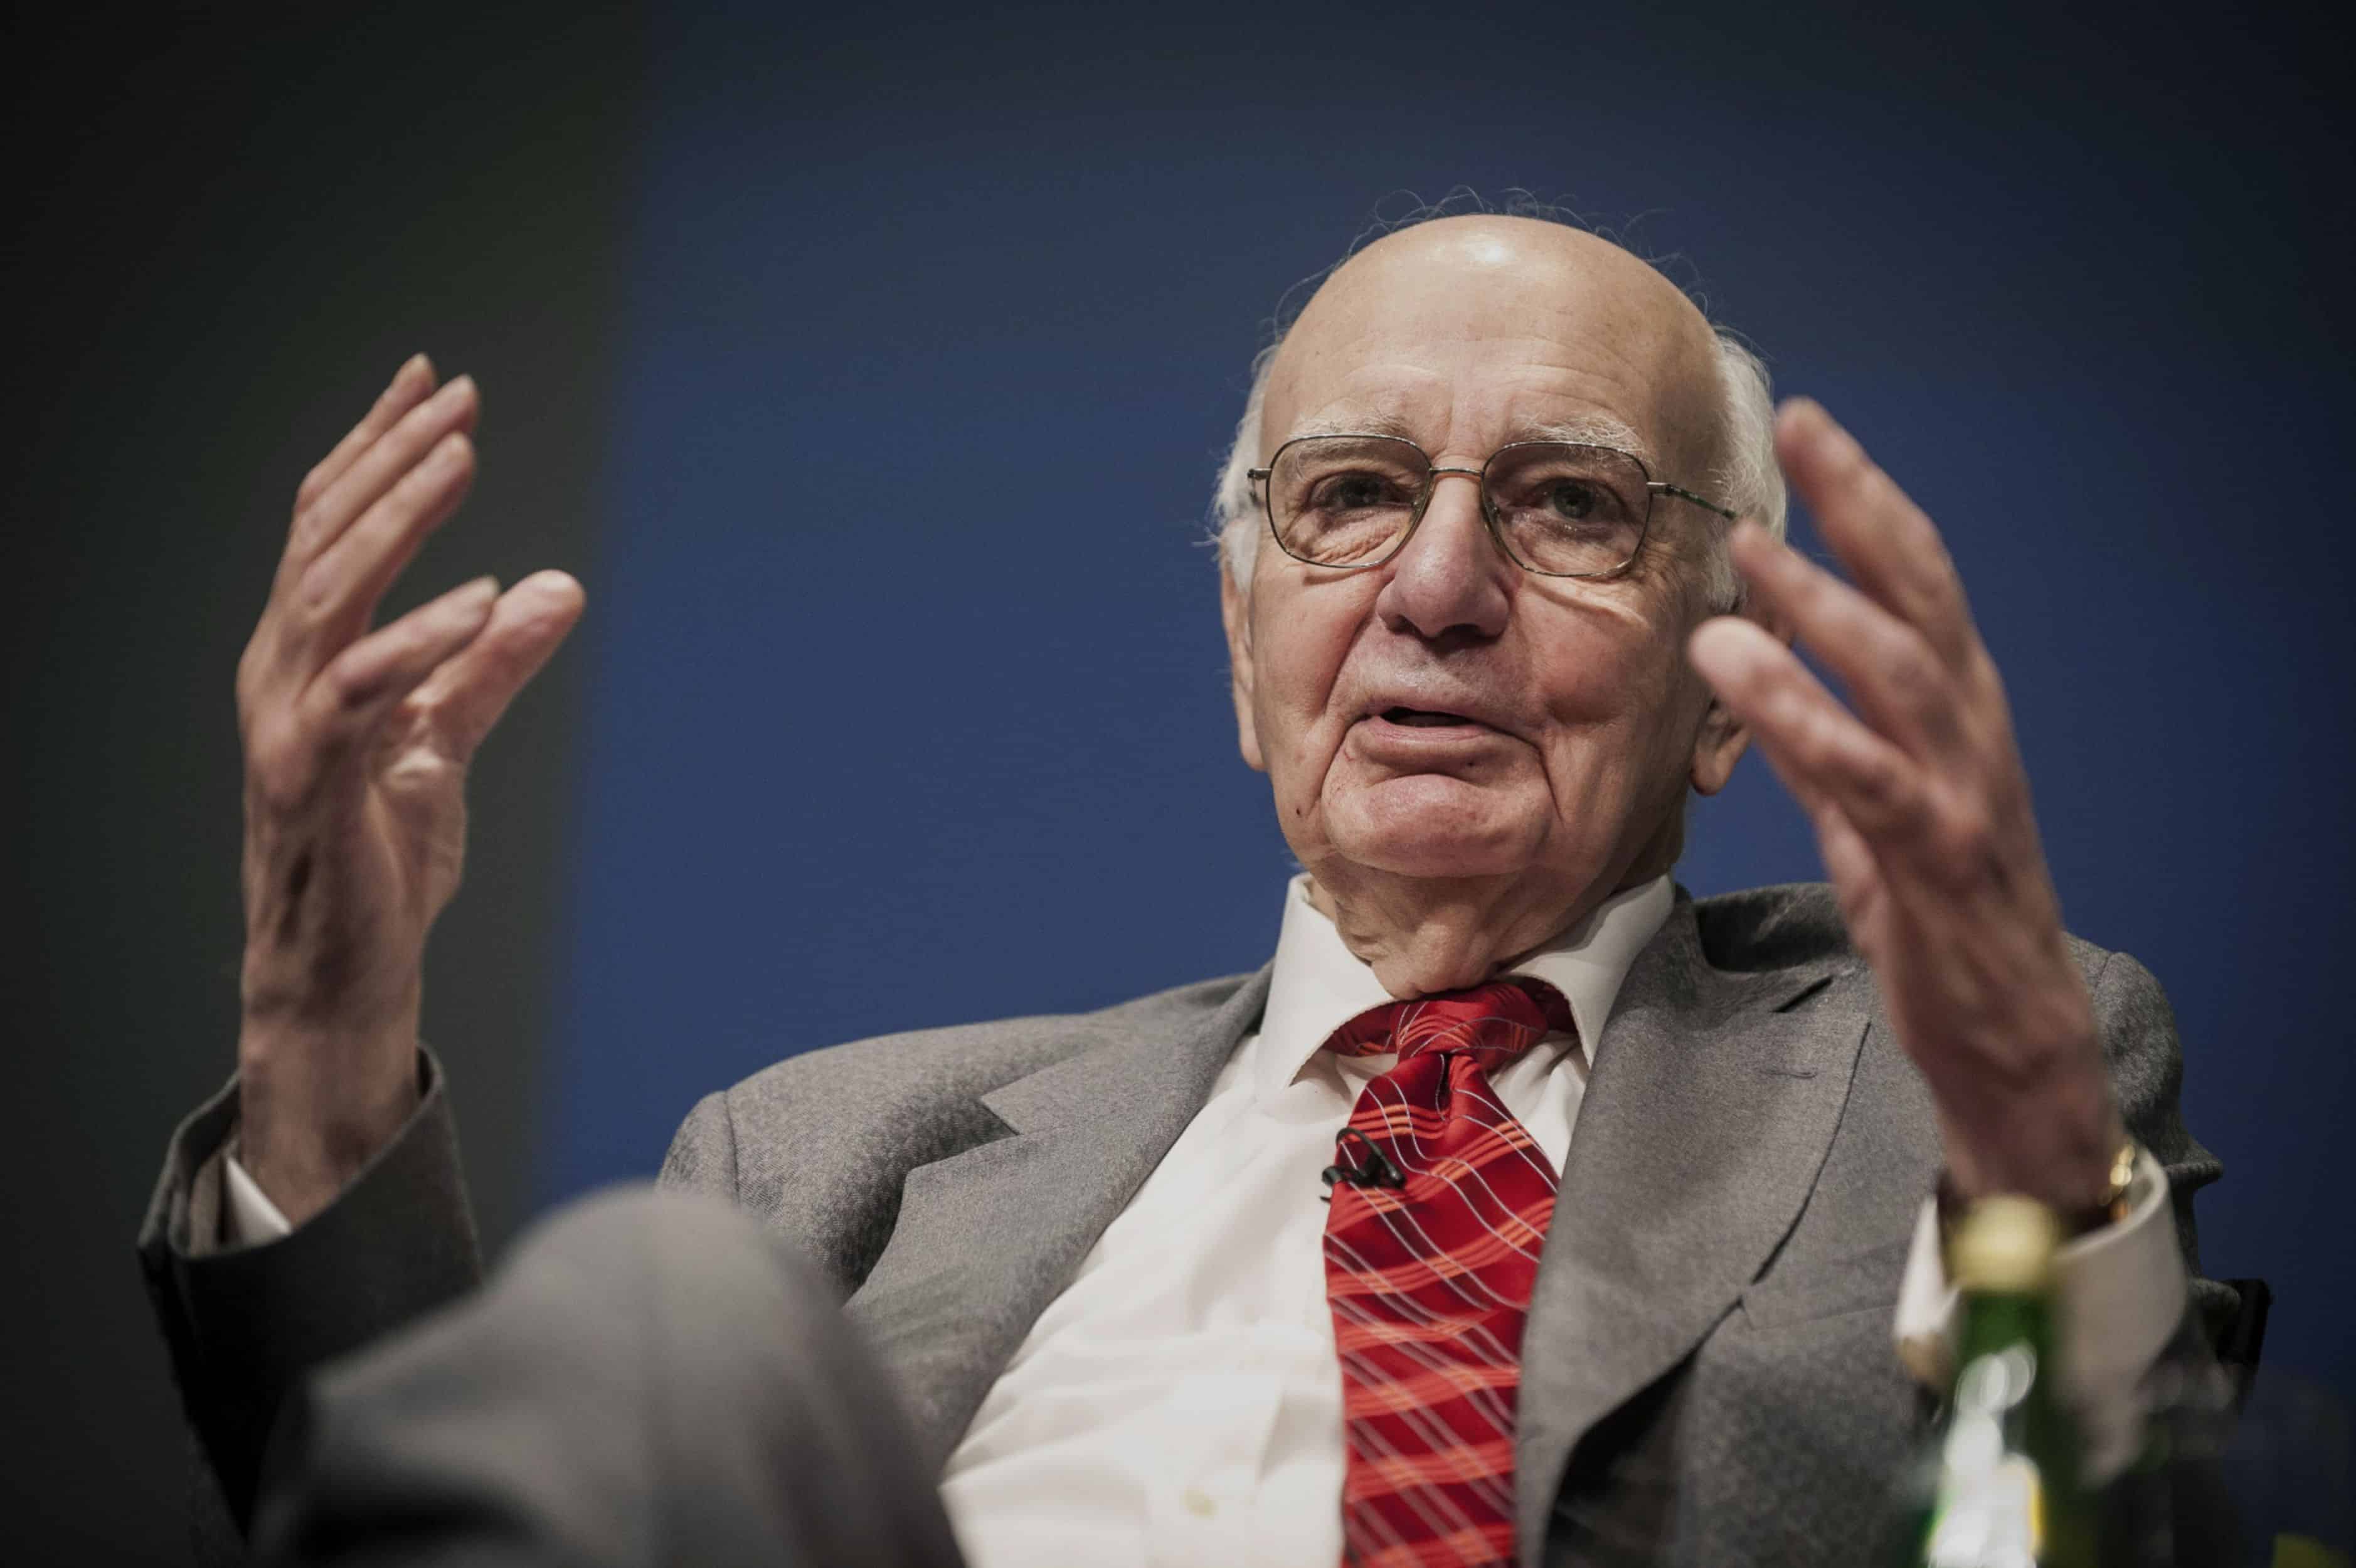 Congress, regulatory agencies rolled back key parts of the Volcker Rule